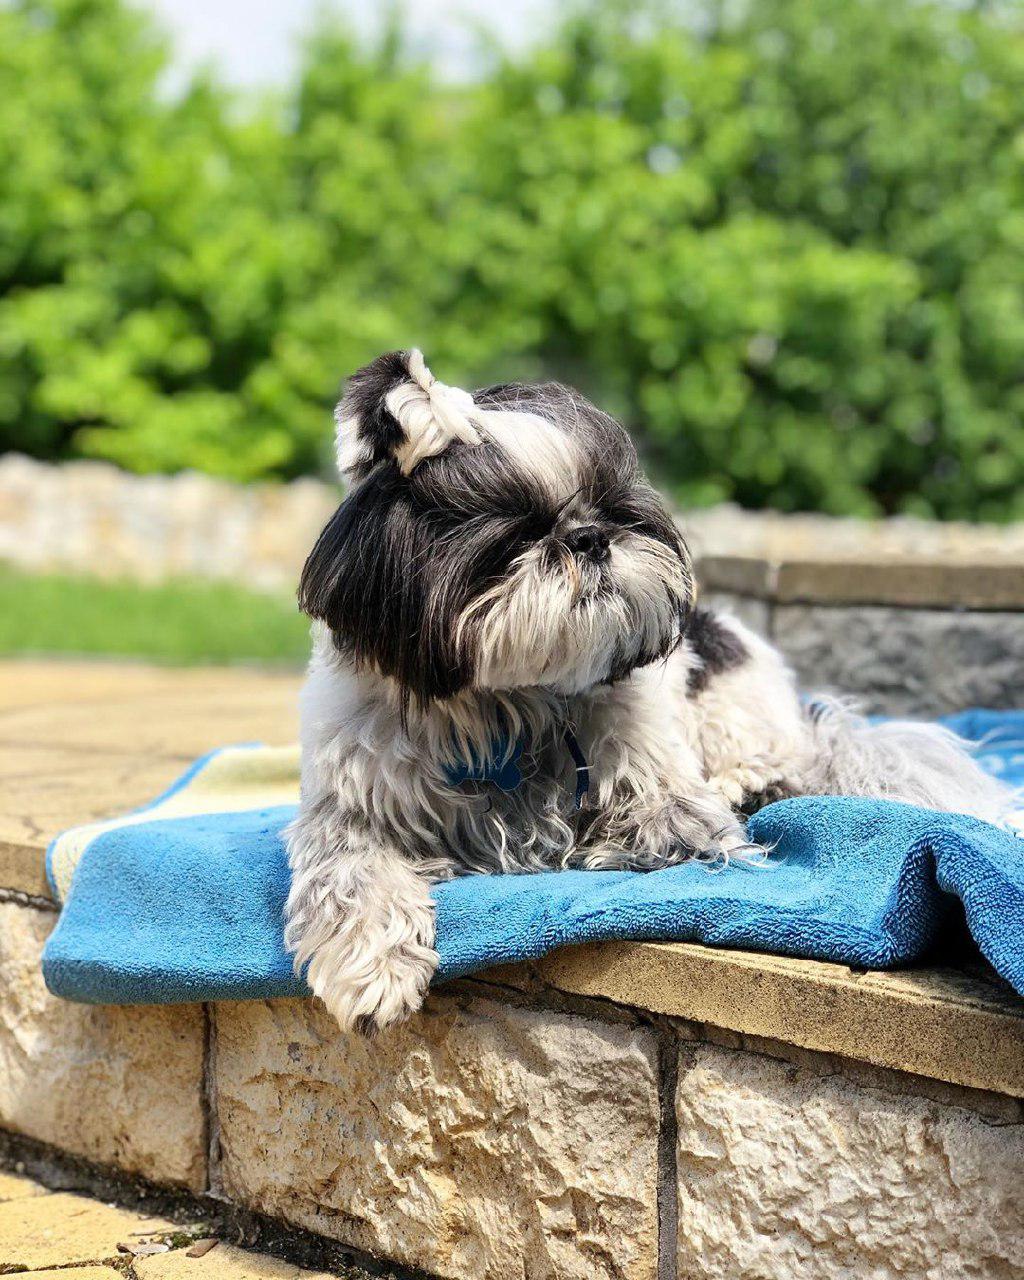 A Shih Tzu lying on top of a blanket in the stairs at the park